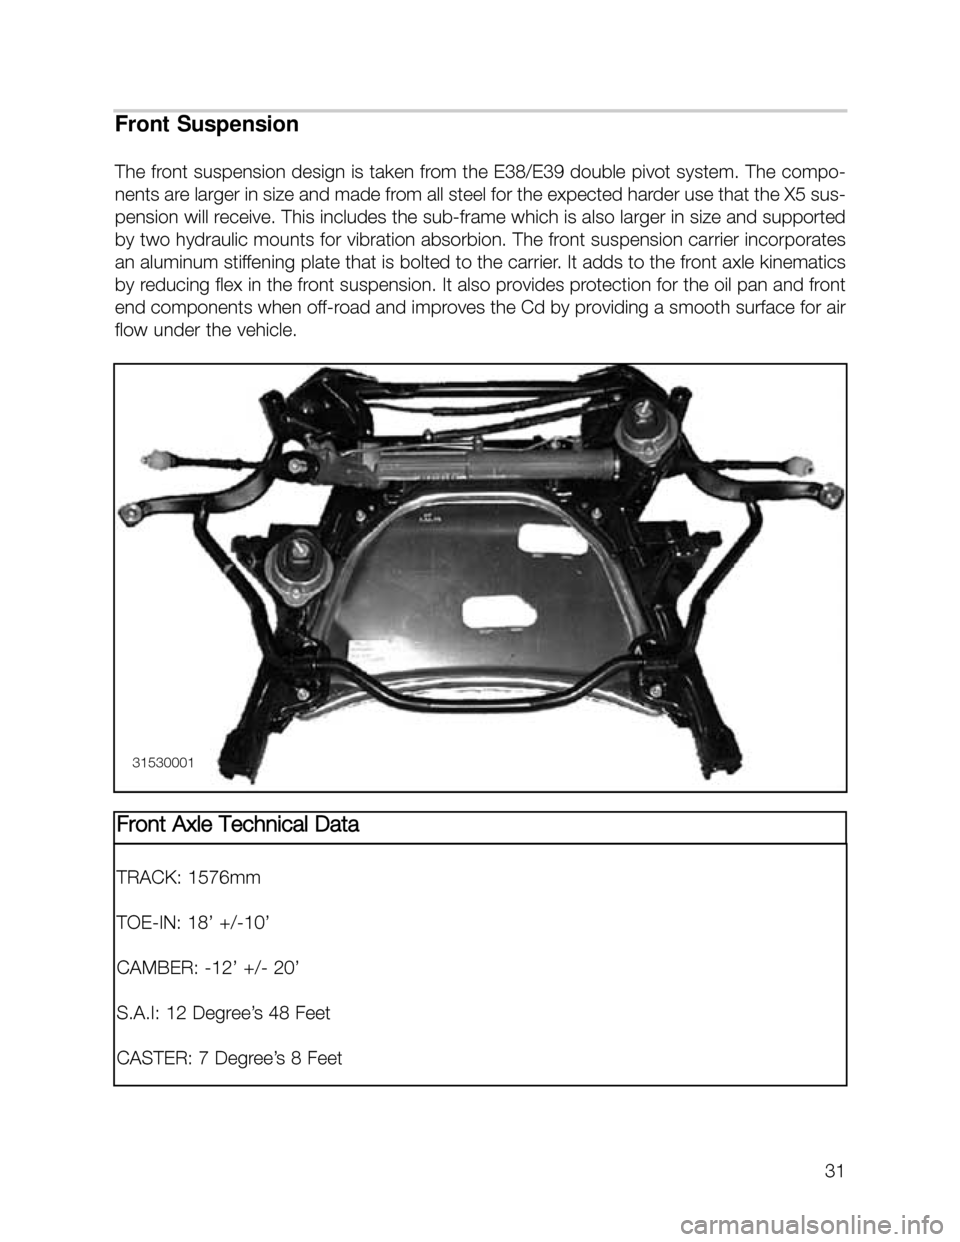 BMW X5 2001 E53 Owners Guide 31
Front Suspension
The front suspension design is taken from the E38/E39 double pivot system. The compo-
nents are larger in size and made from all steel for the expected harder use that the X5 sus-
